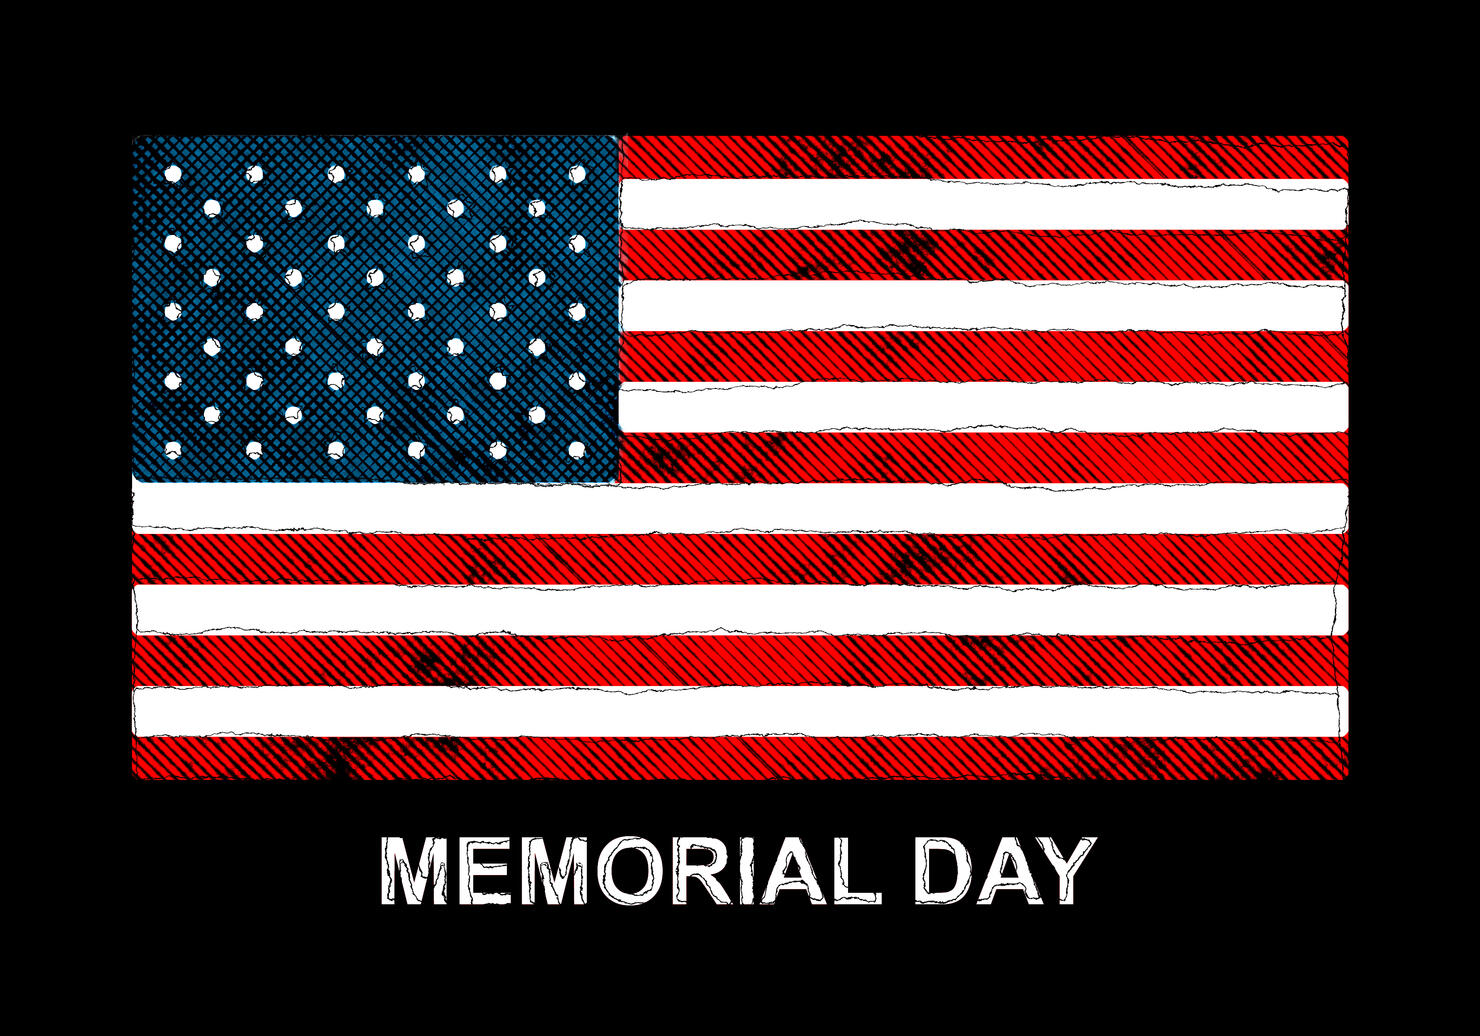 American Flag Memorial Day Celebration on background and Text Watercolor Digital Paint